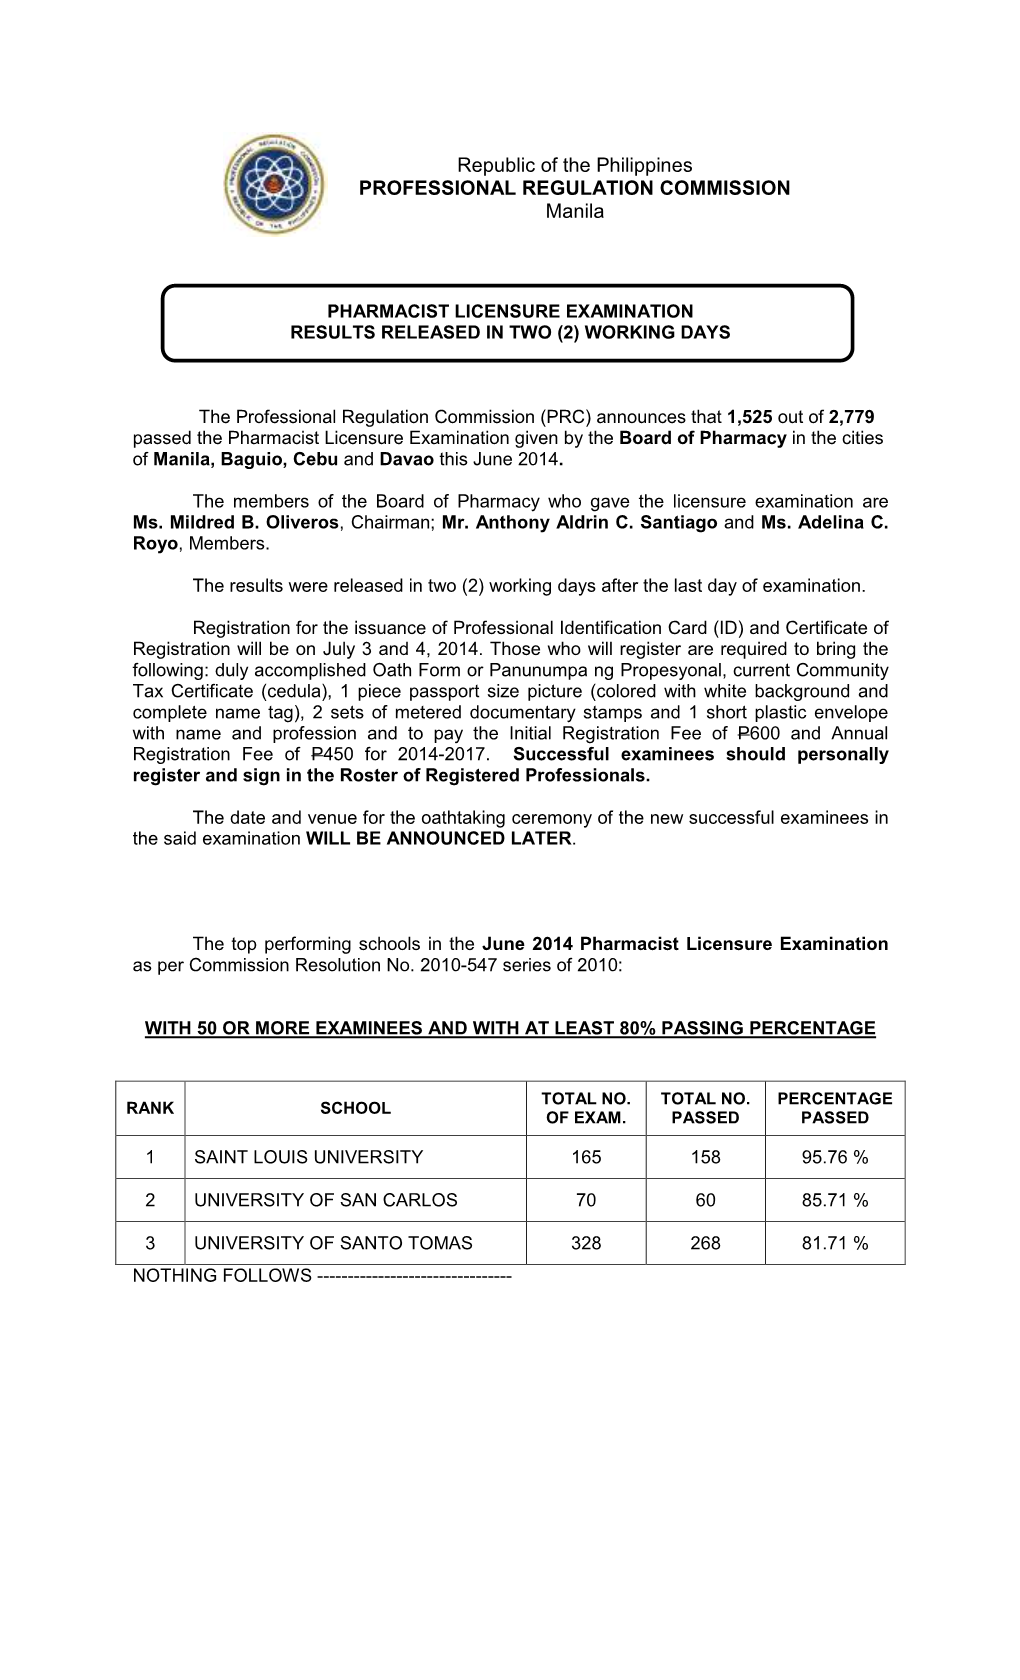 Pharmacist Licensure Examination Results Released in Two (2) Working Days